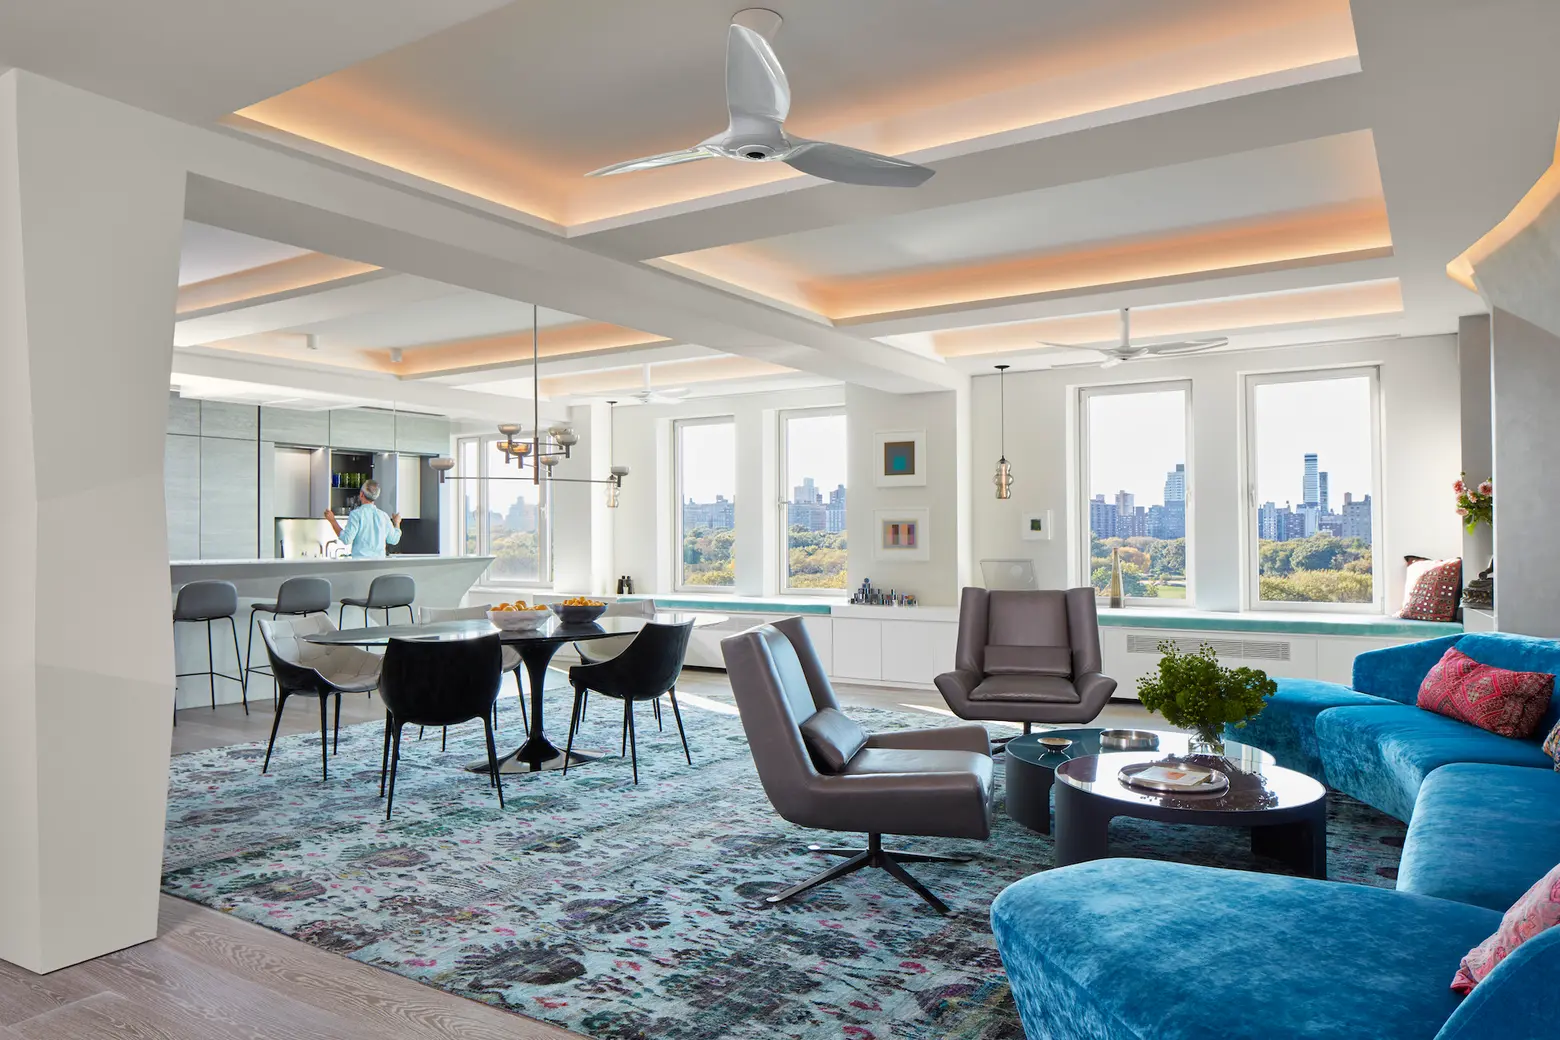 My 3,000sqft: Architect Wid Chapman renovated his Upper East Side home using color and openness